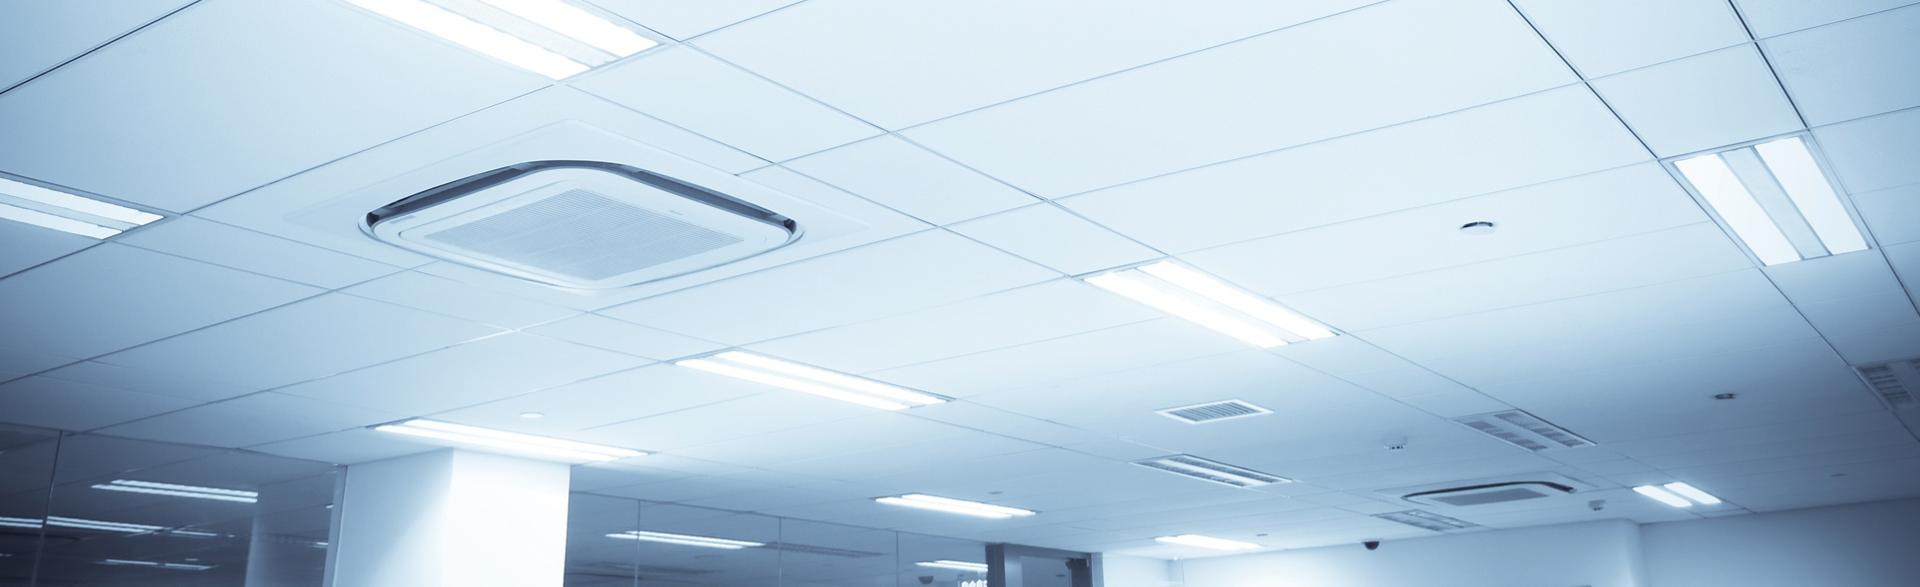 Inefficient, costly fluorescent bulbs on office ceiling